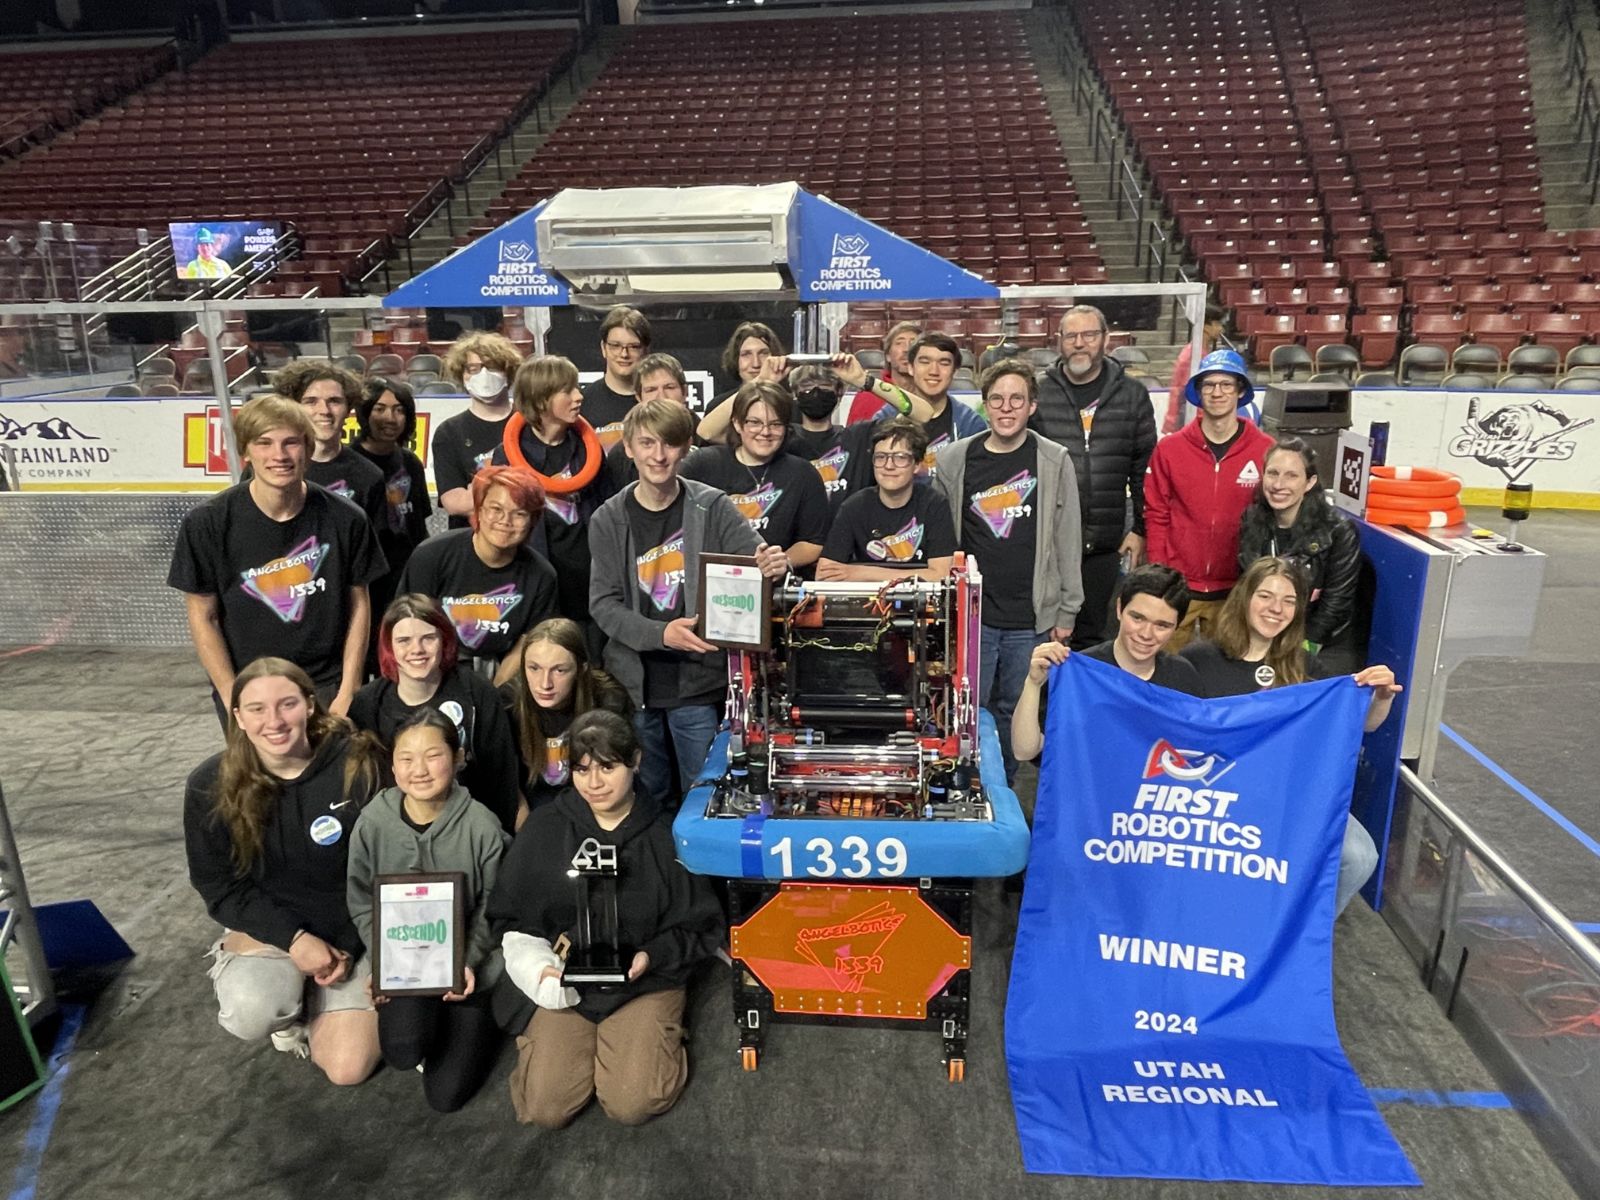 DPS East students at a robotics competition in utah where they won first place